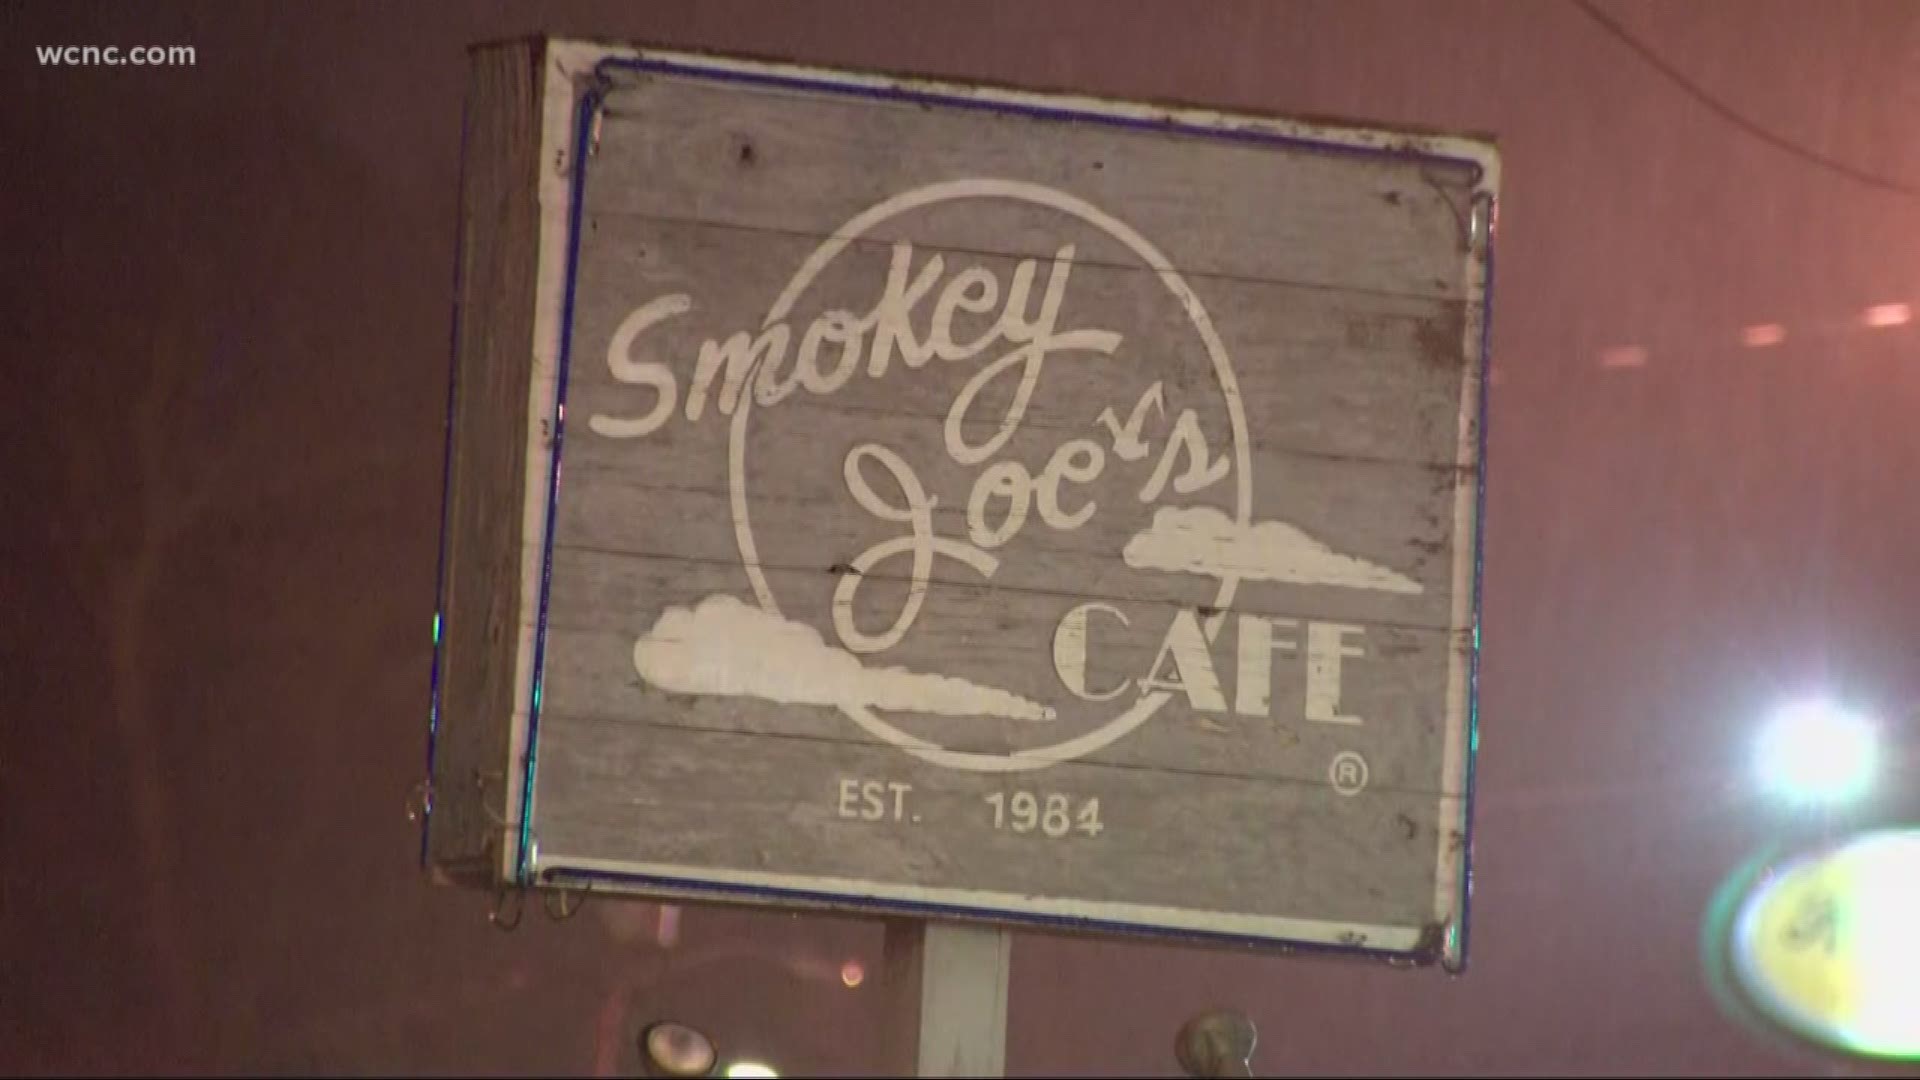 A man was shot and killed while standing outside of Smokey Joe's Cafe in east Charlotte Saturday night when police say someone fired multiple shots into the parking lot and at the building.